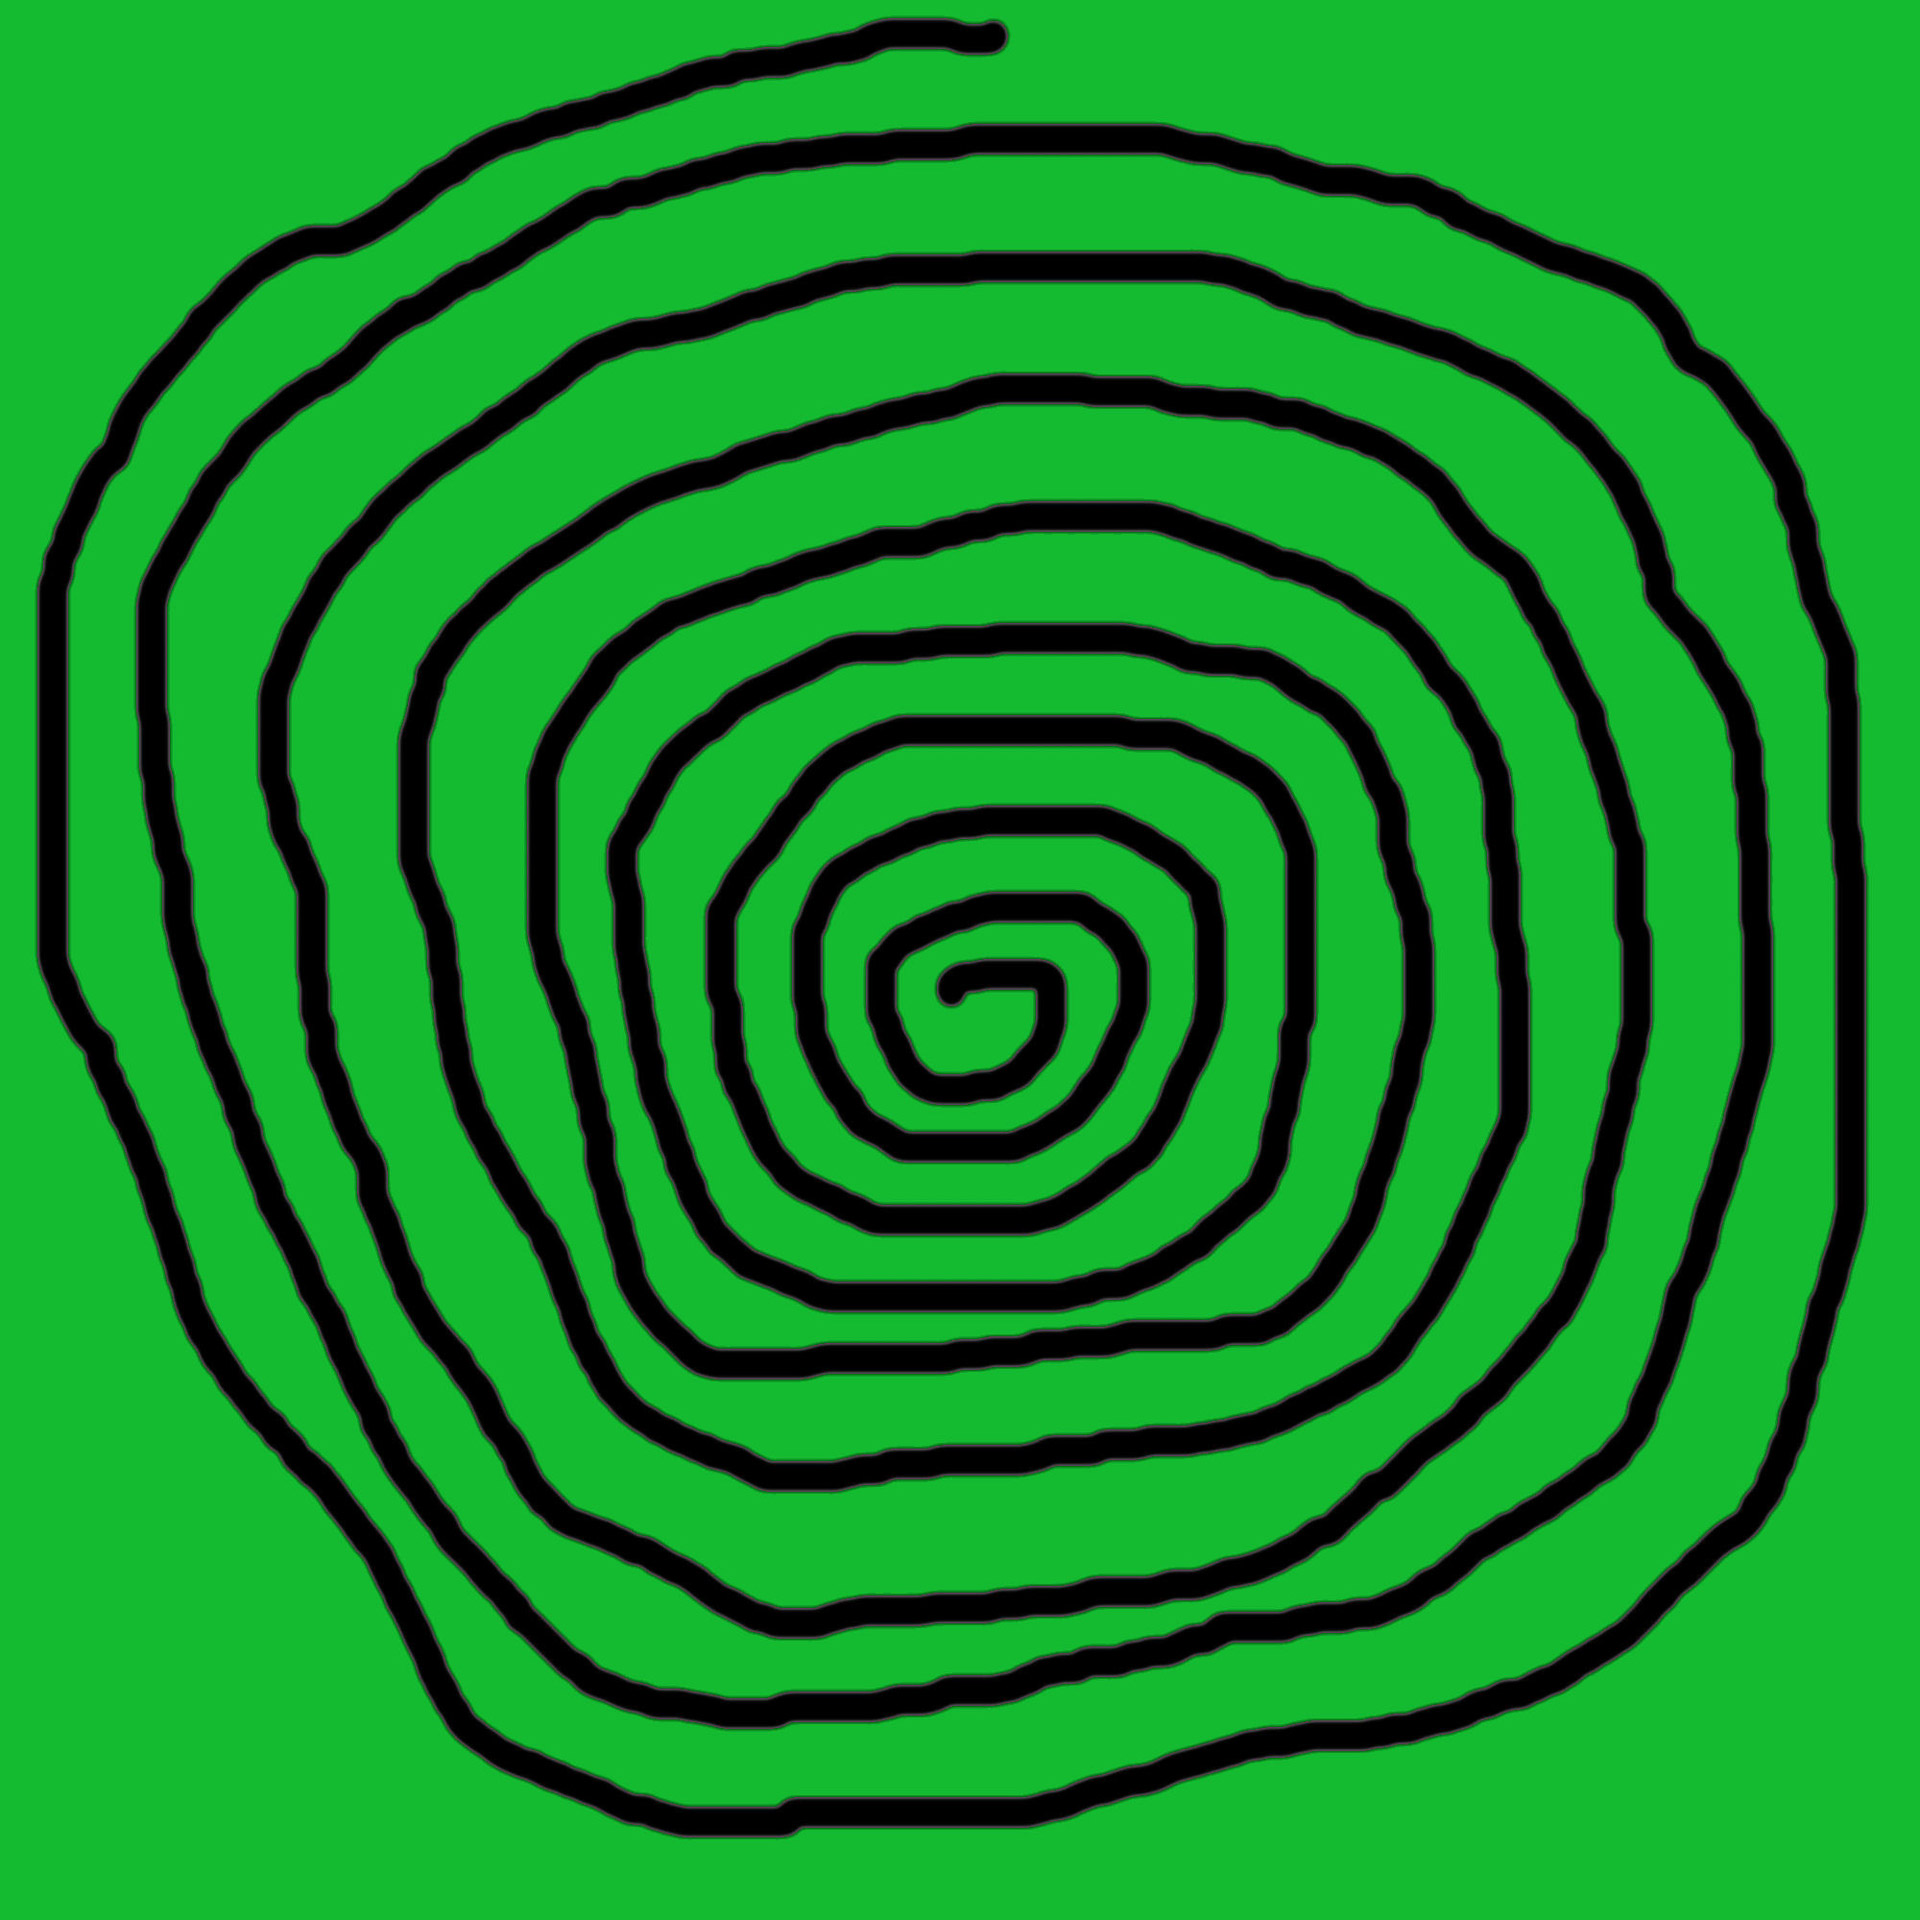 Spiral With Green Background